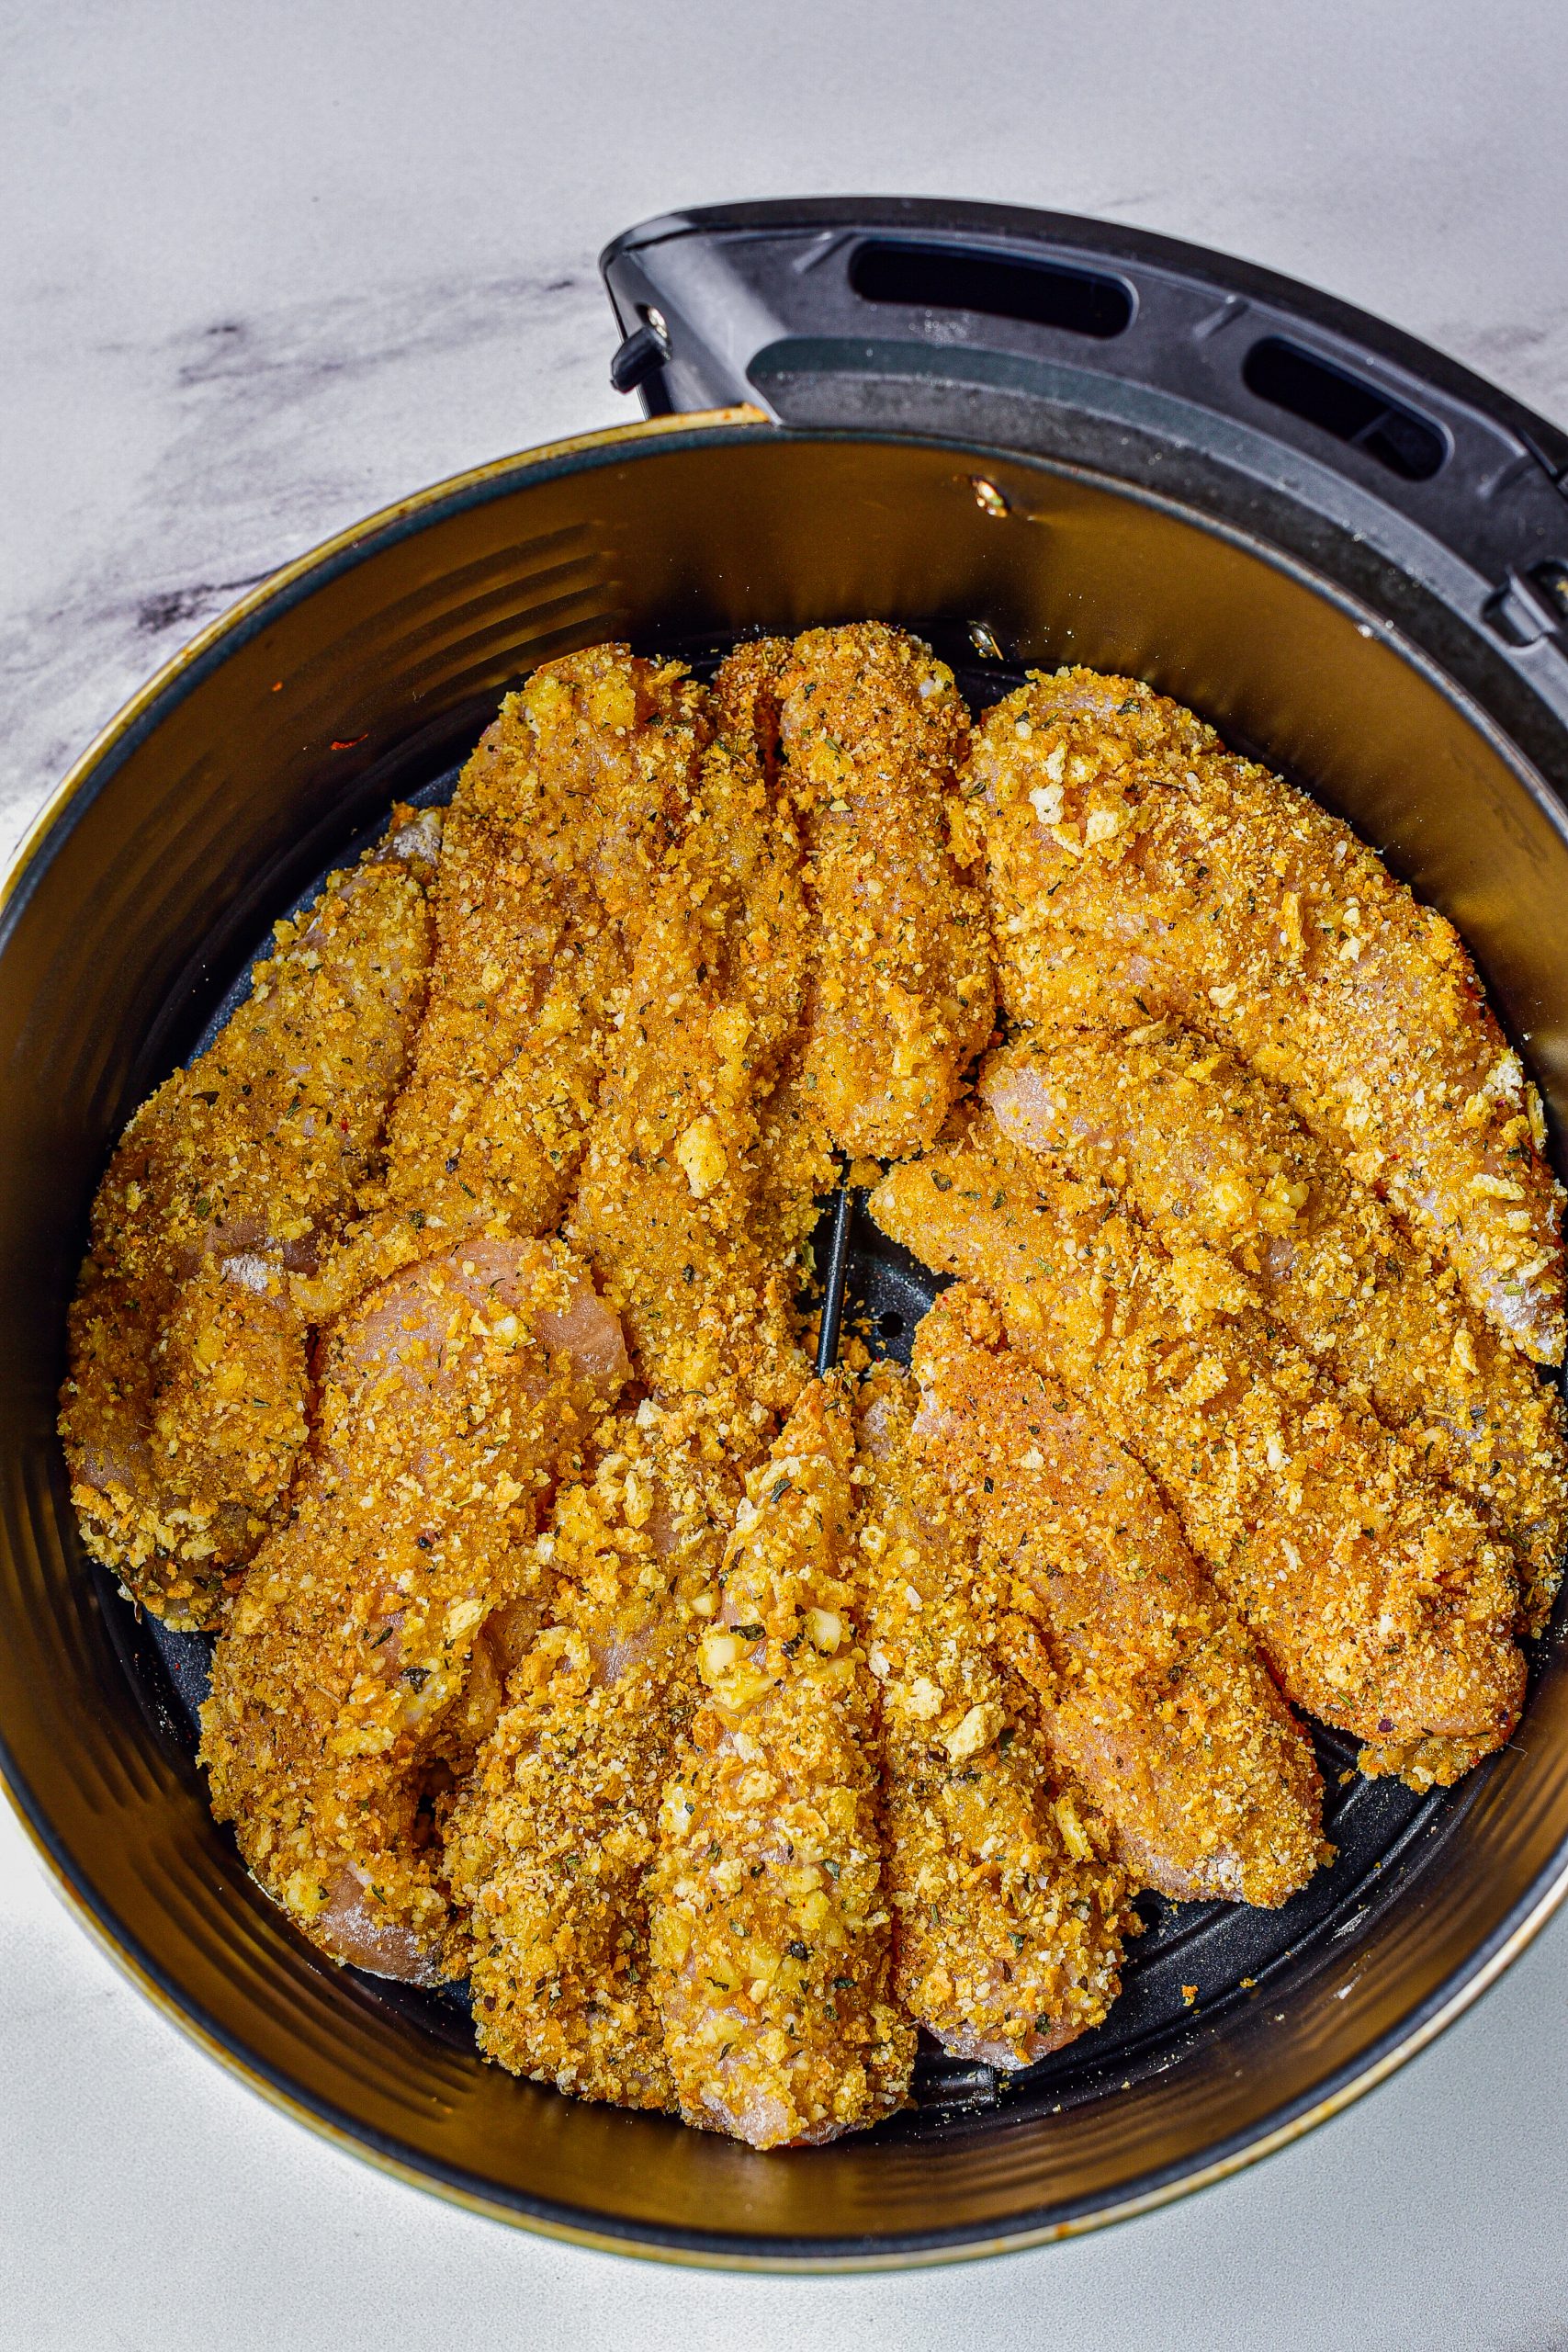 Dredge the chicken tenderloins in the flour mixture, dip them into the olive oil mixture, and coat them in the crumb mixture. 